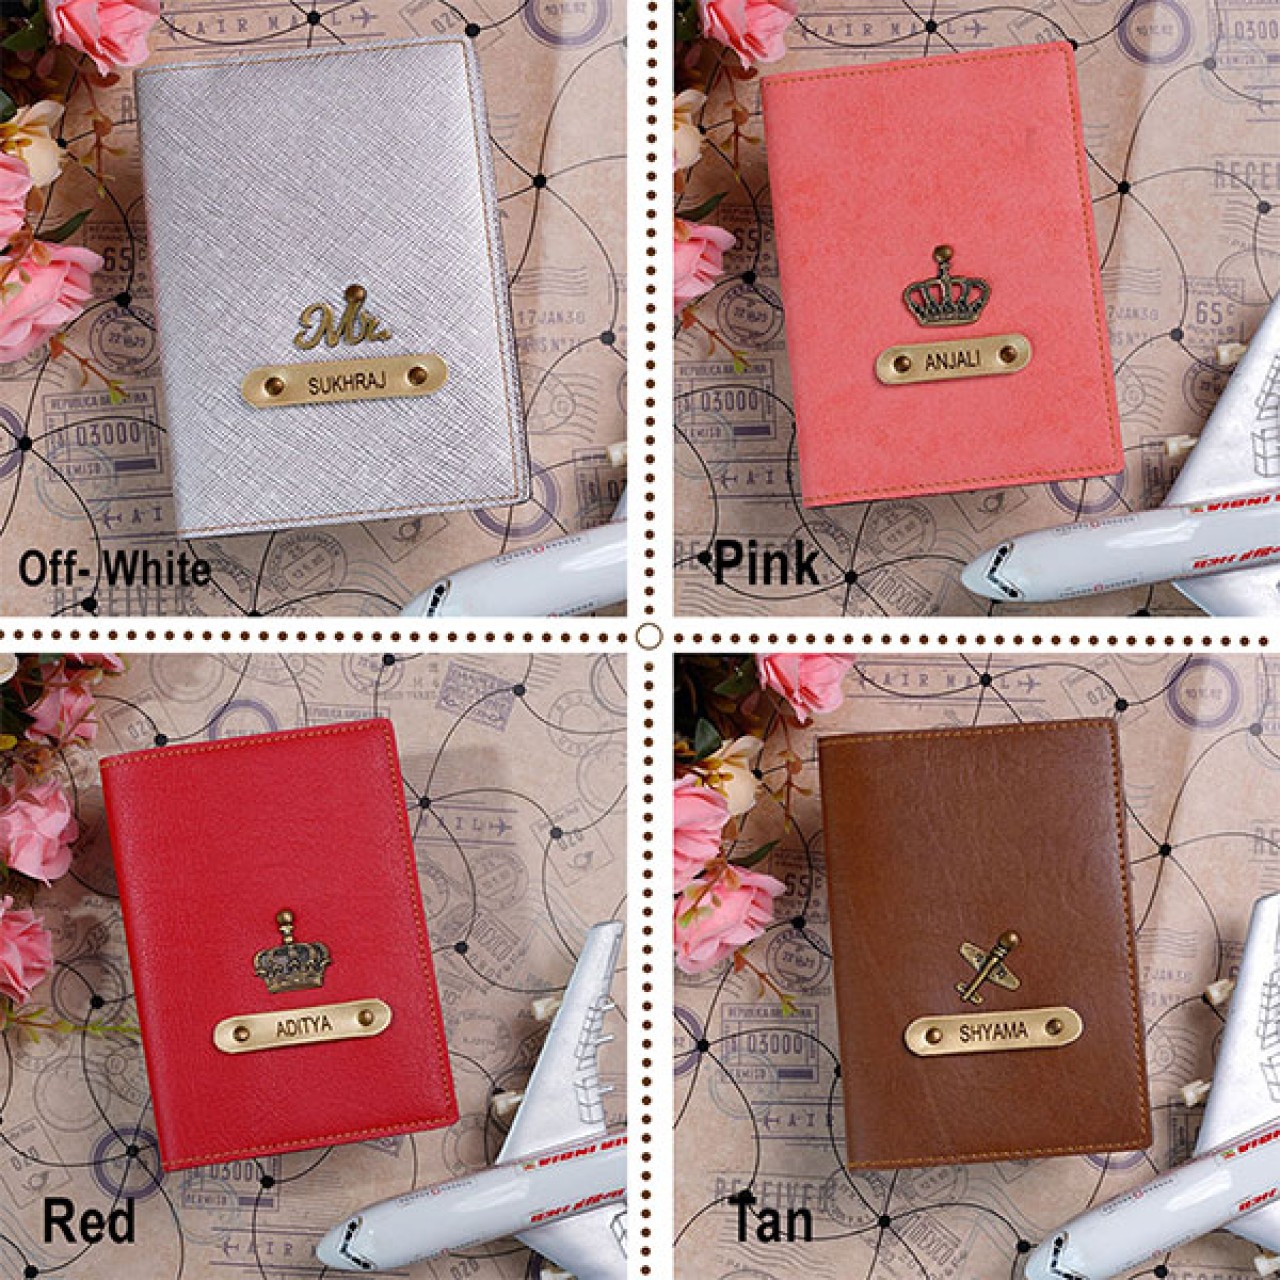 Customized Passport Cover With Name & Charm